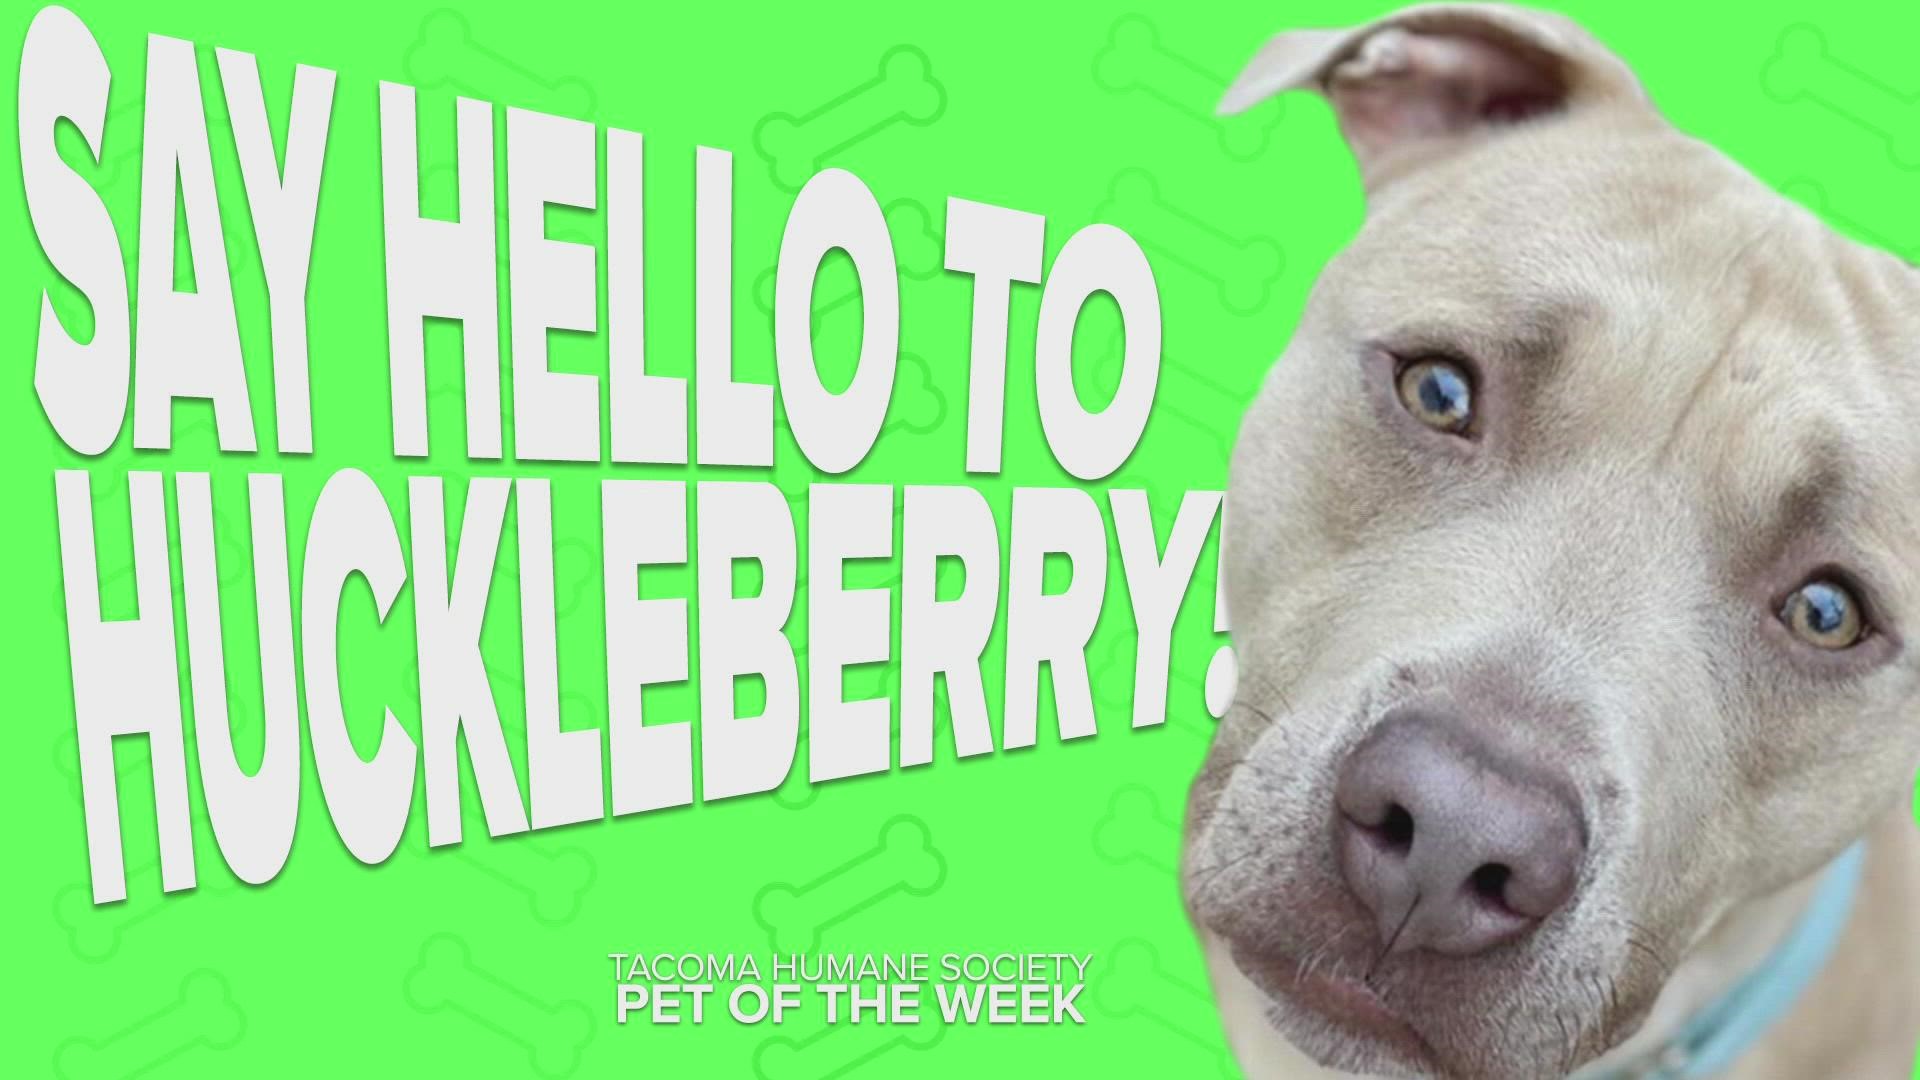 This week's featured adoptable pet is Huckleberry!